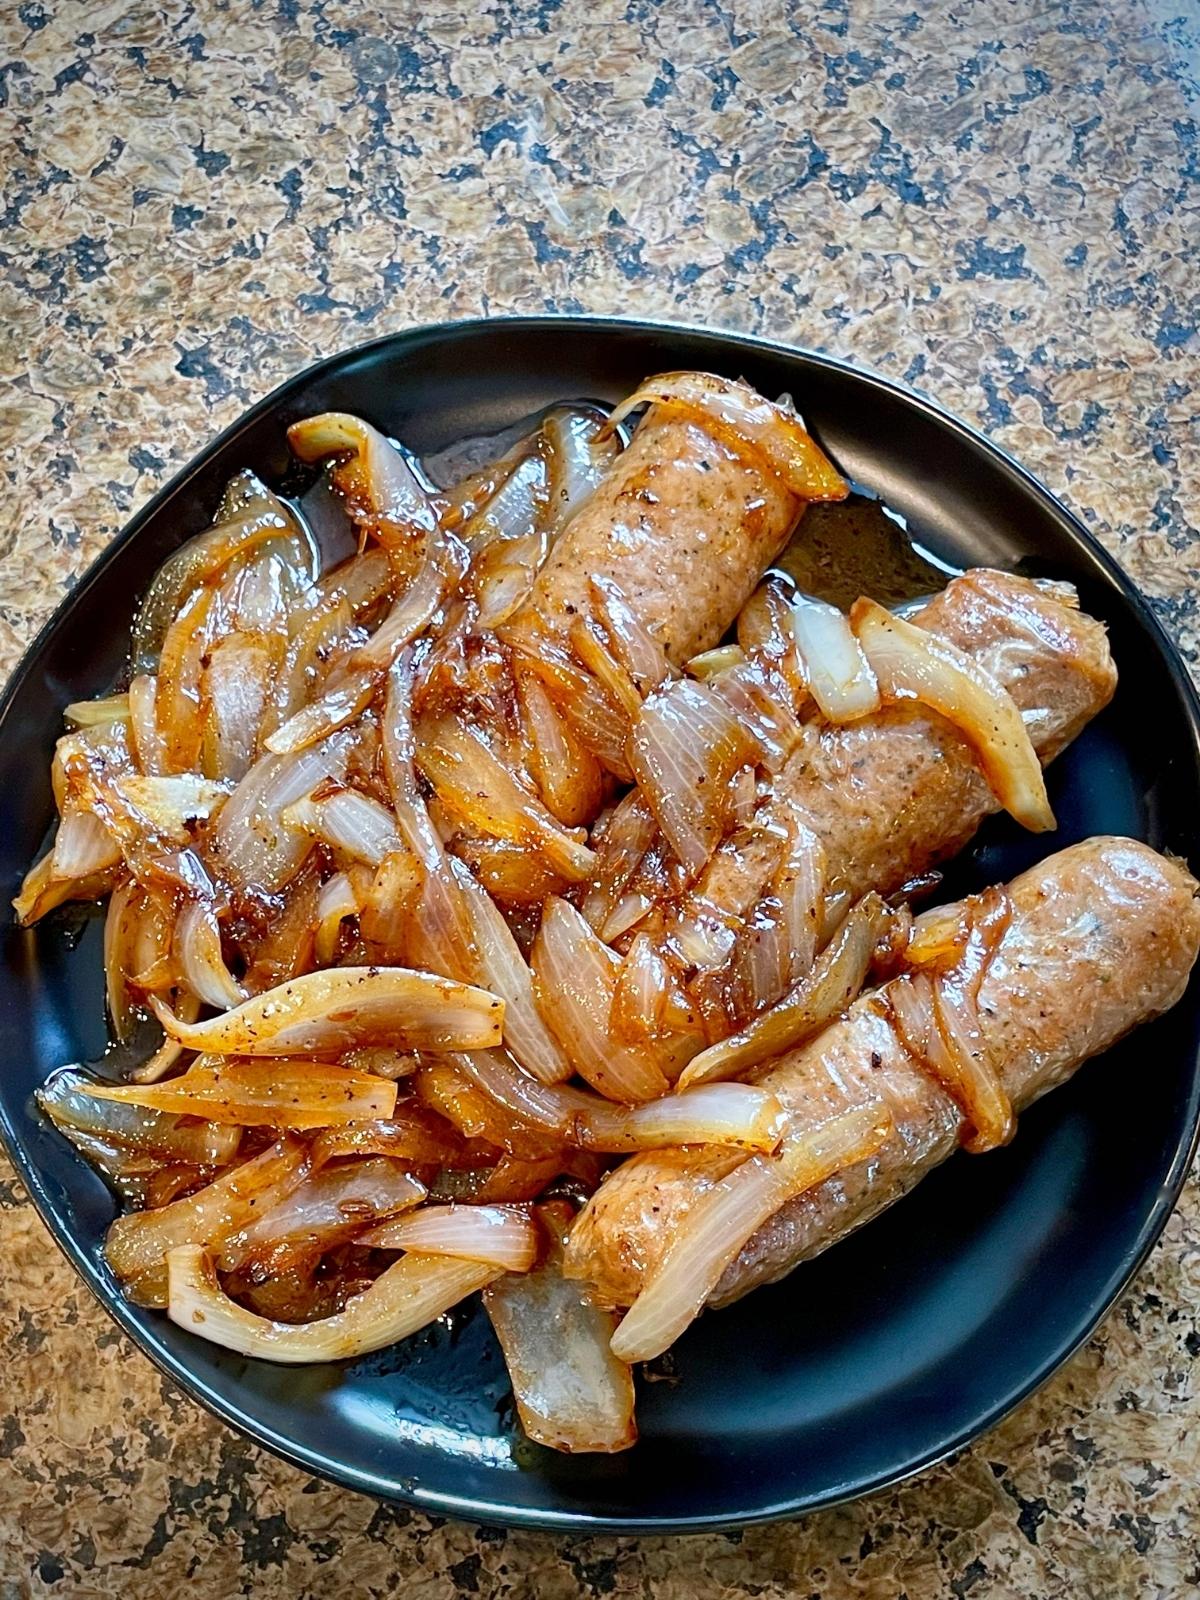 Brats and onions on a plate.